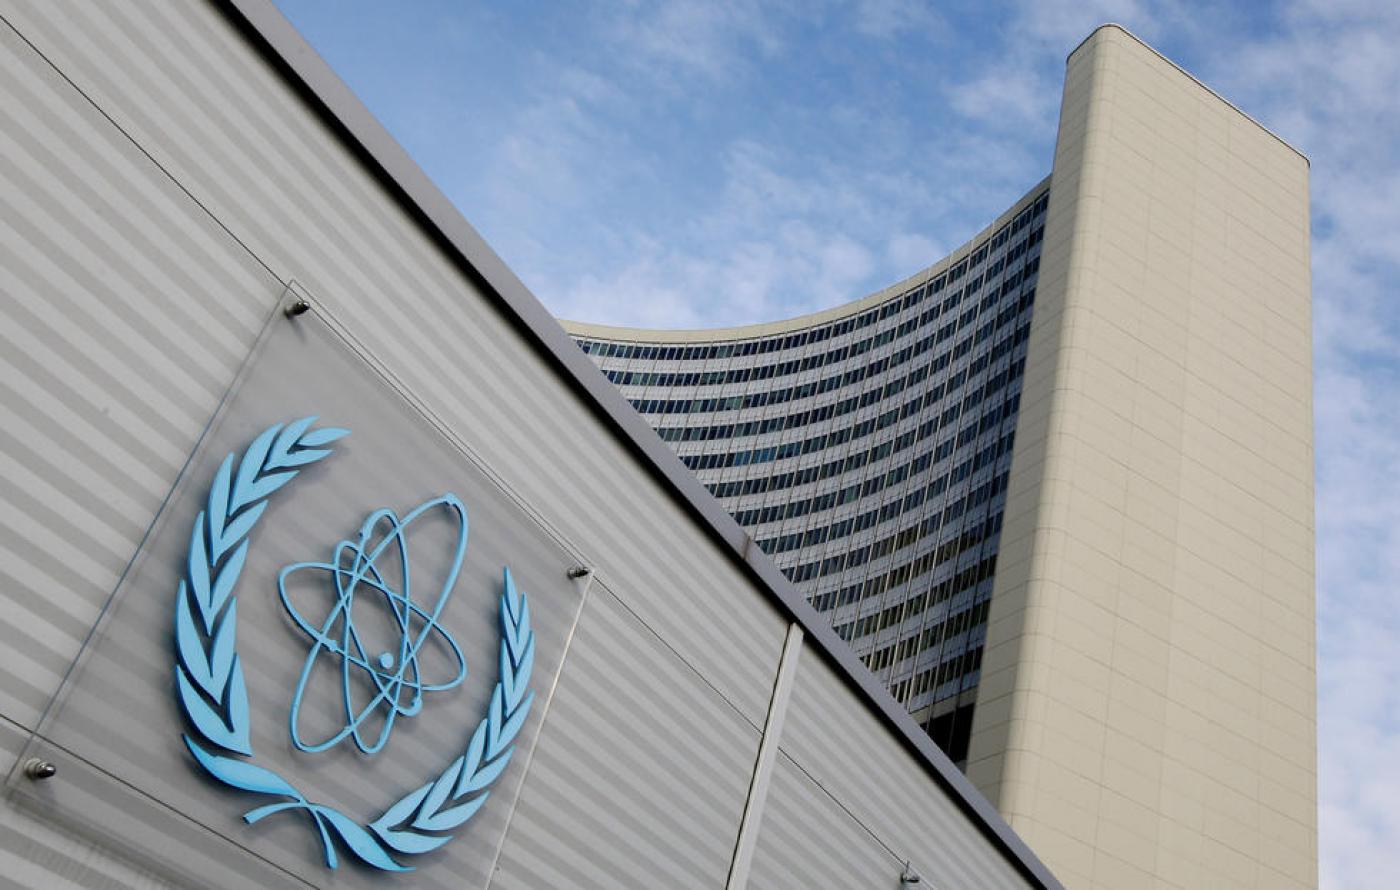 UN Nuclear Watchdog: Iran’s regime is violating all JCPOA restrictions